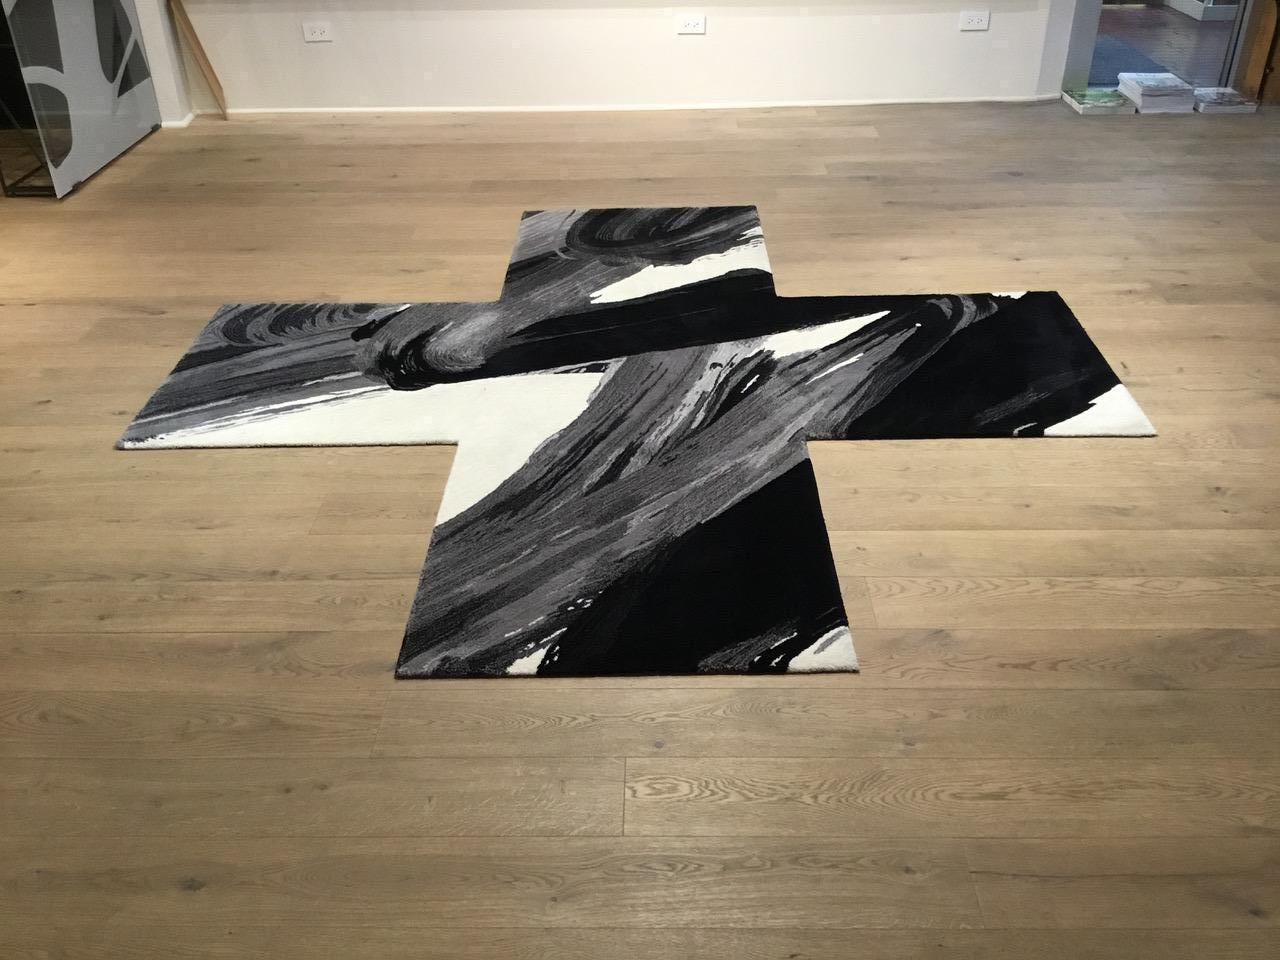 Calle Henzel has over the past twenty years translated his artistic practice as painter and collage artist into the medium at hand, positioning Henzel Studio as one of the most progressive luxury rug brands in the world. While remaining at the